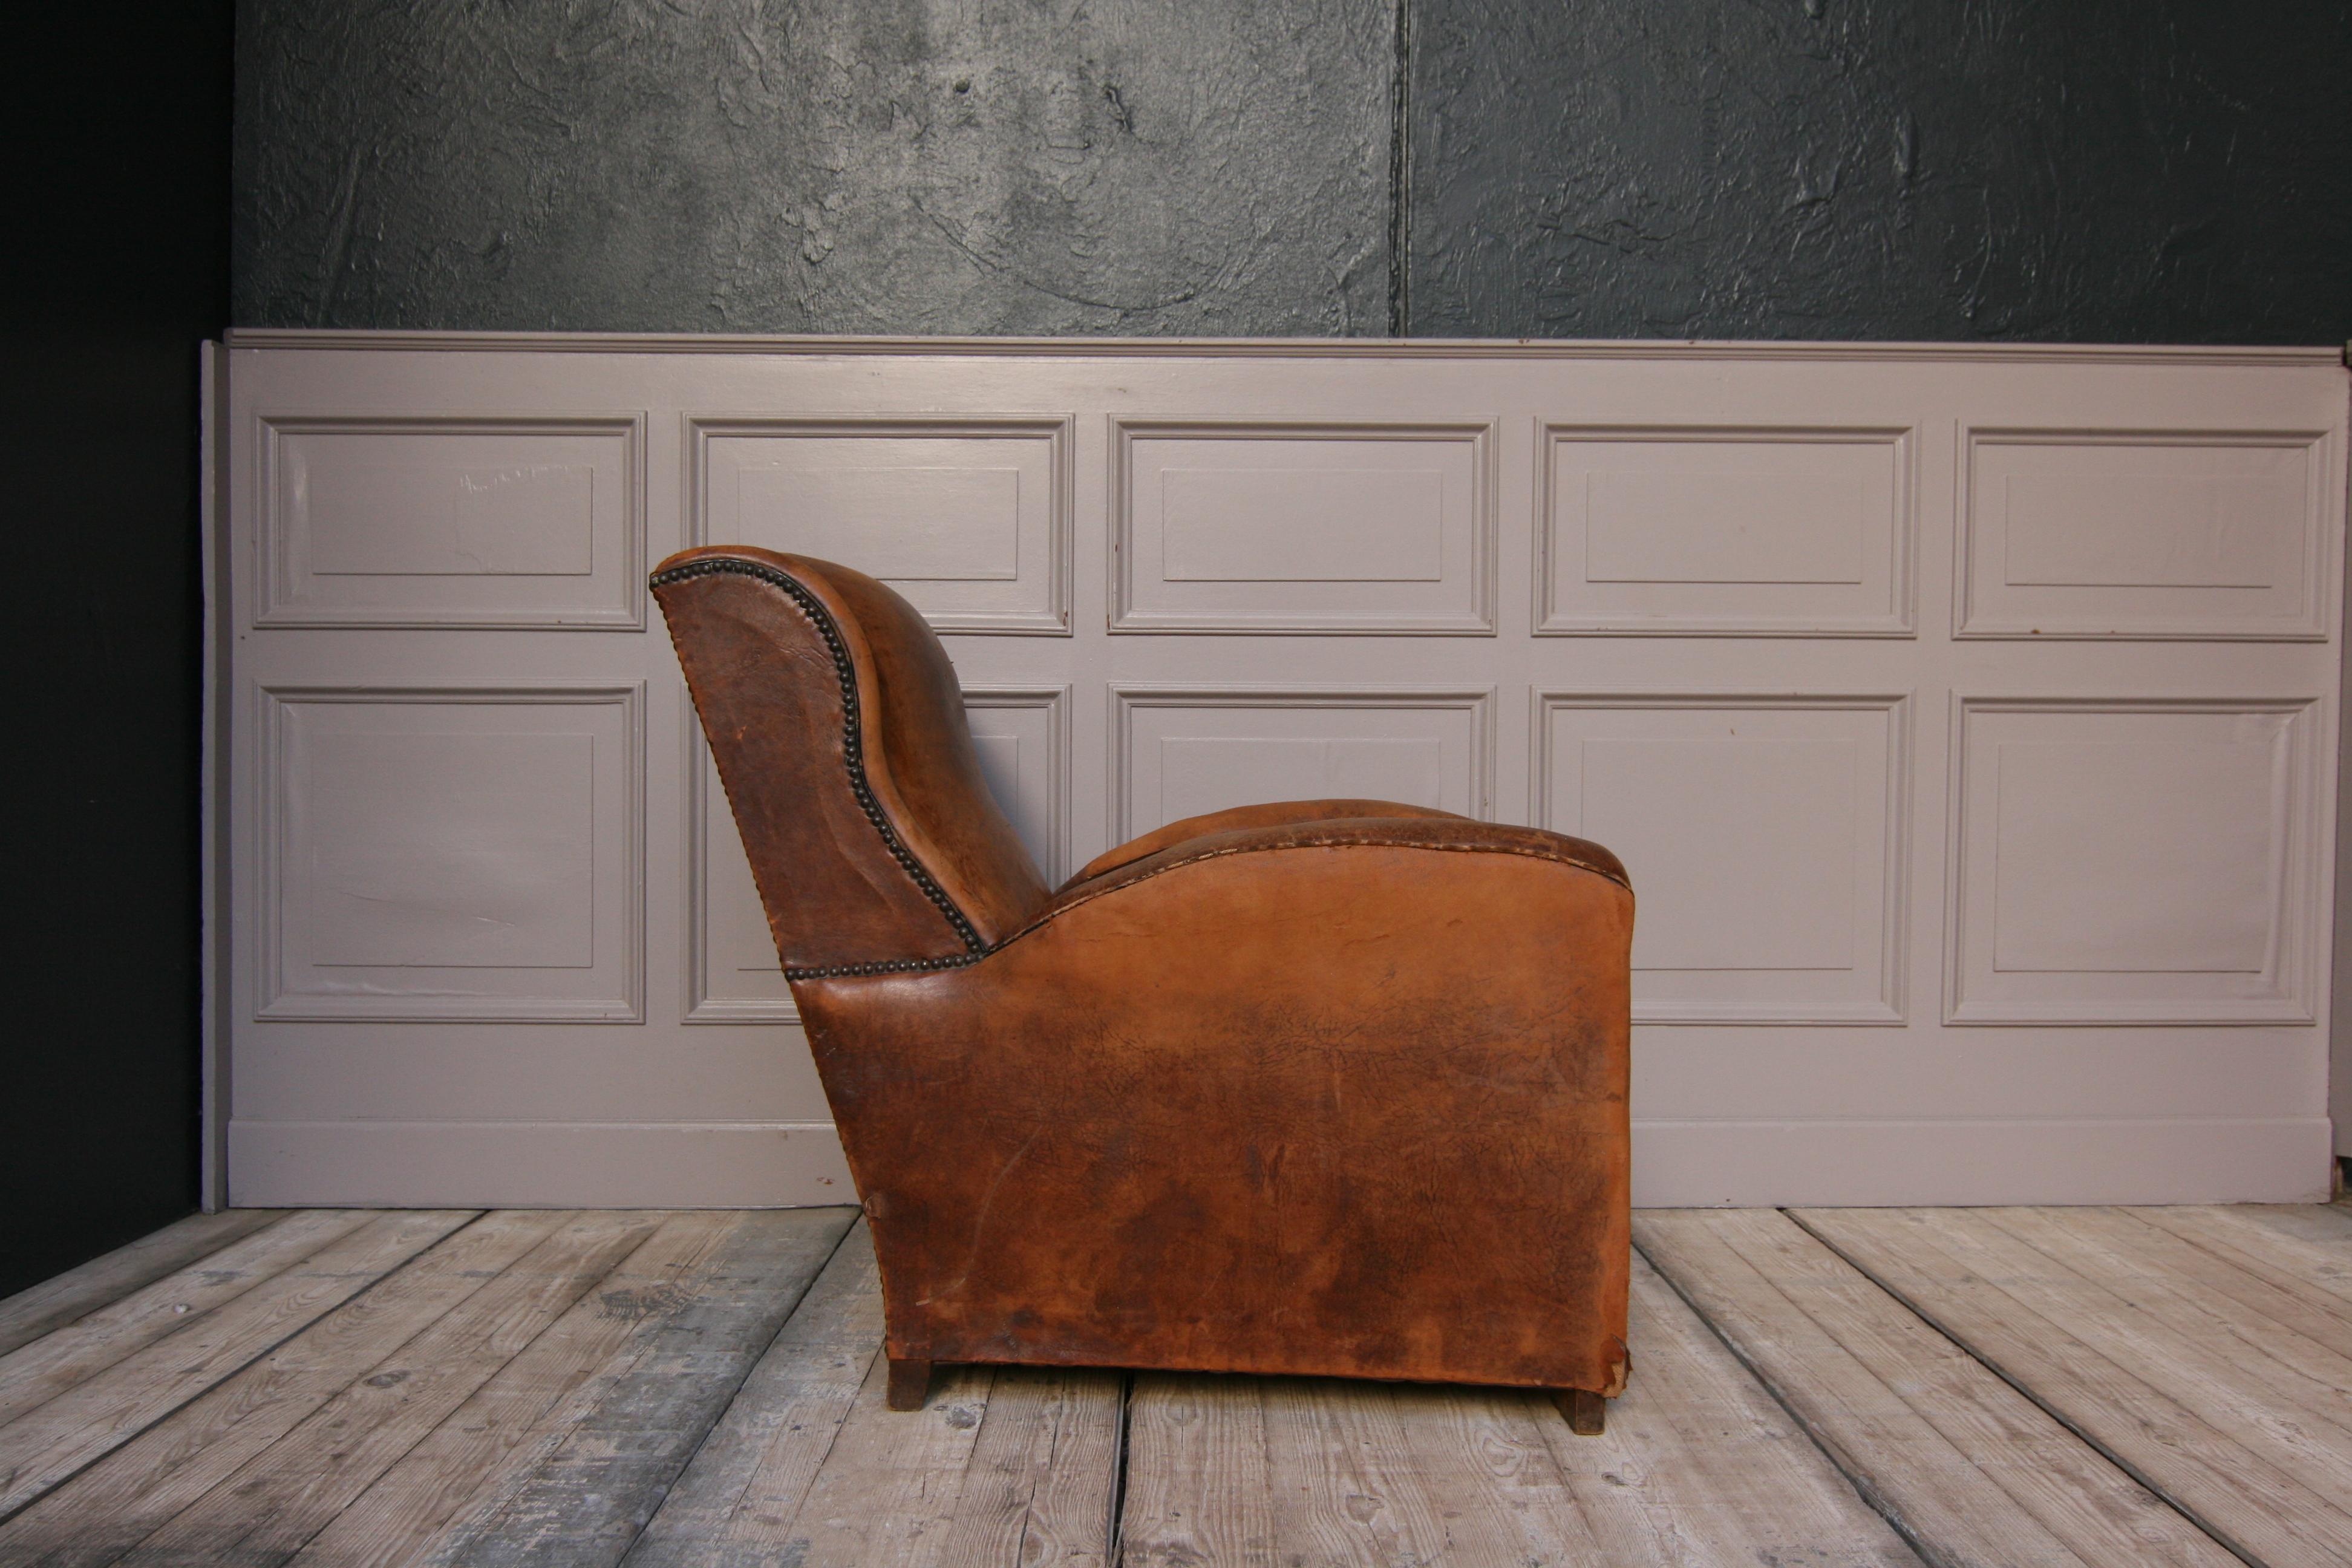 Early 20th Century French 1920s Art Deco Brown Leather Armchair. Vintage European Club Chairs